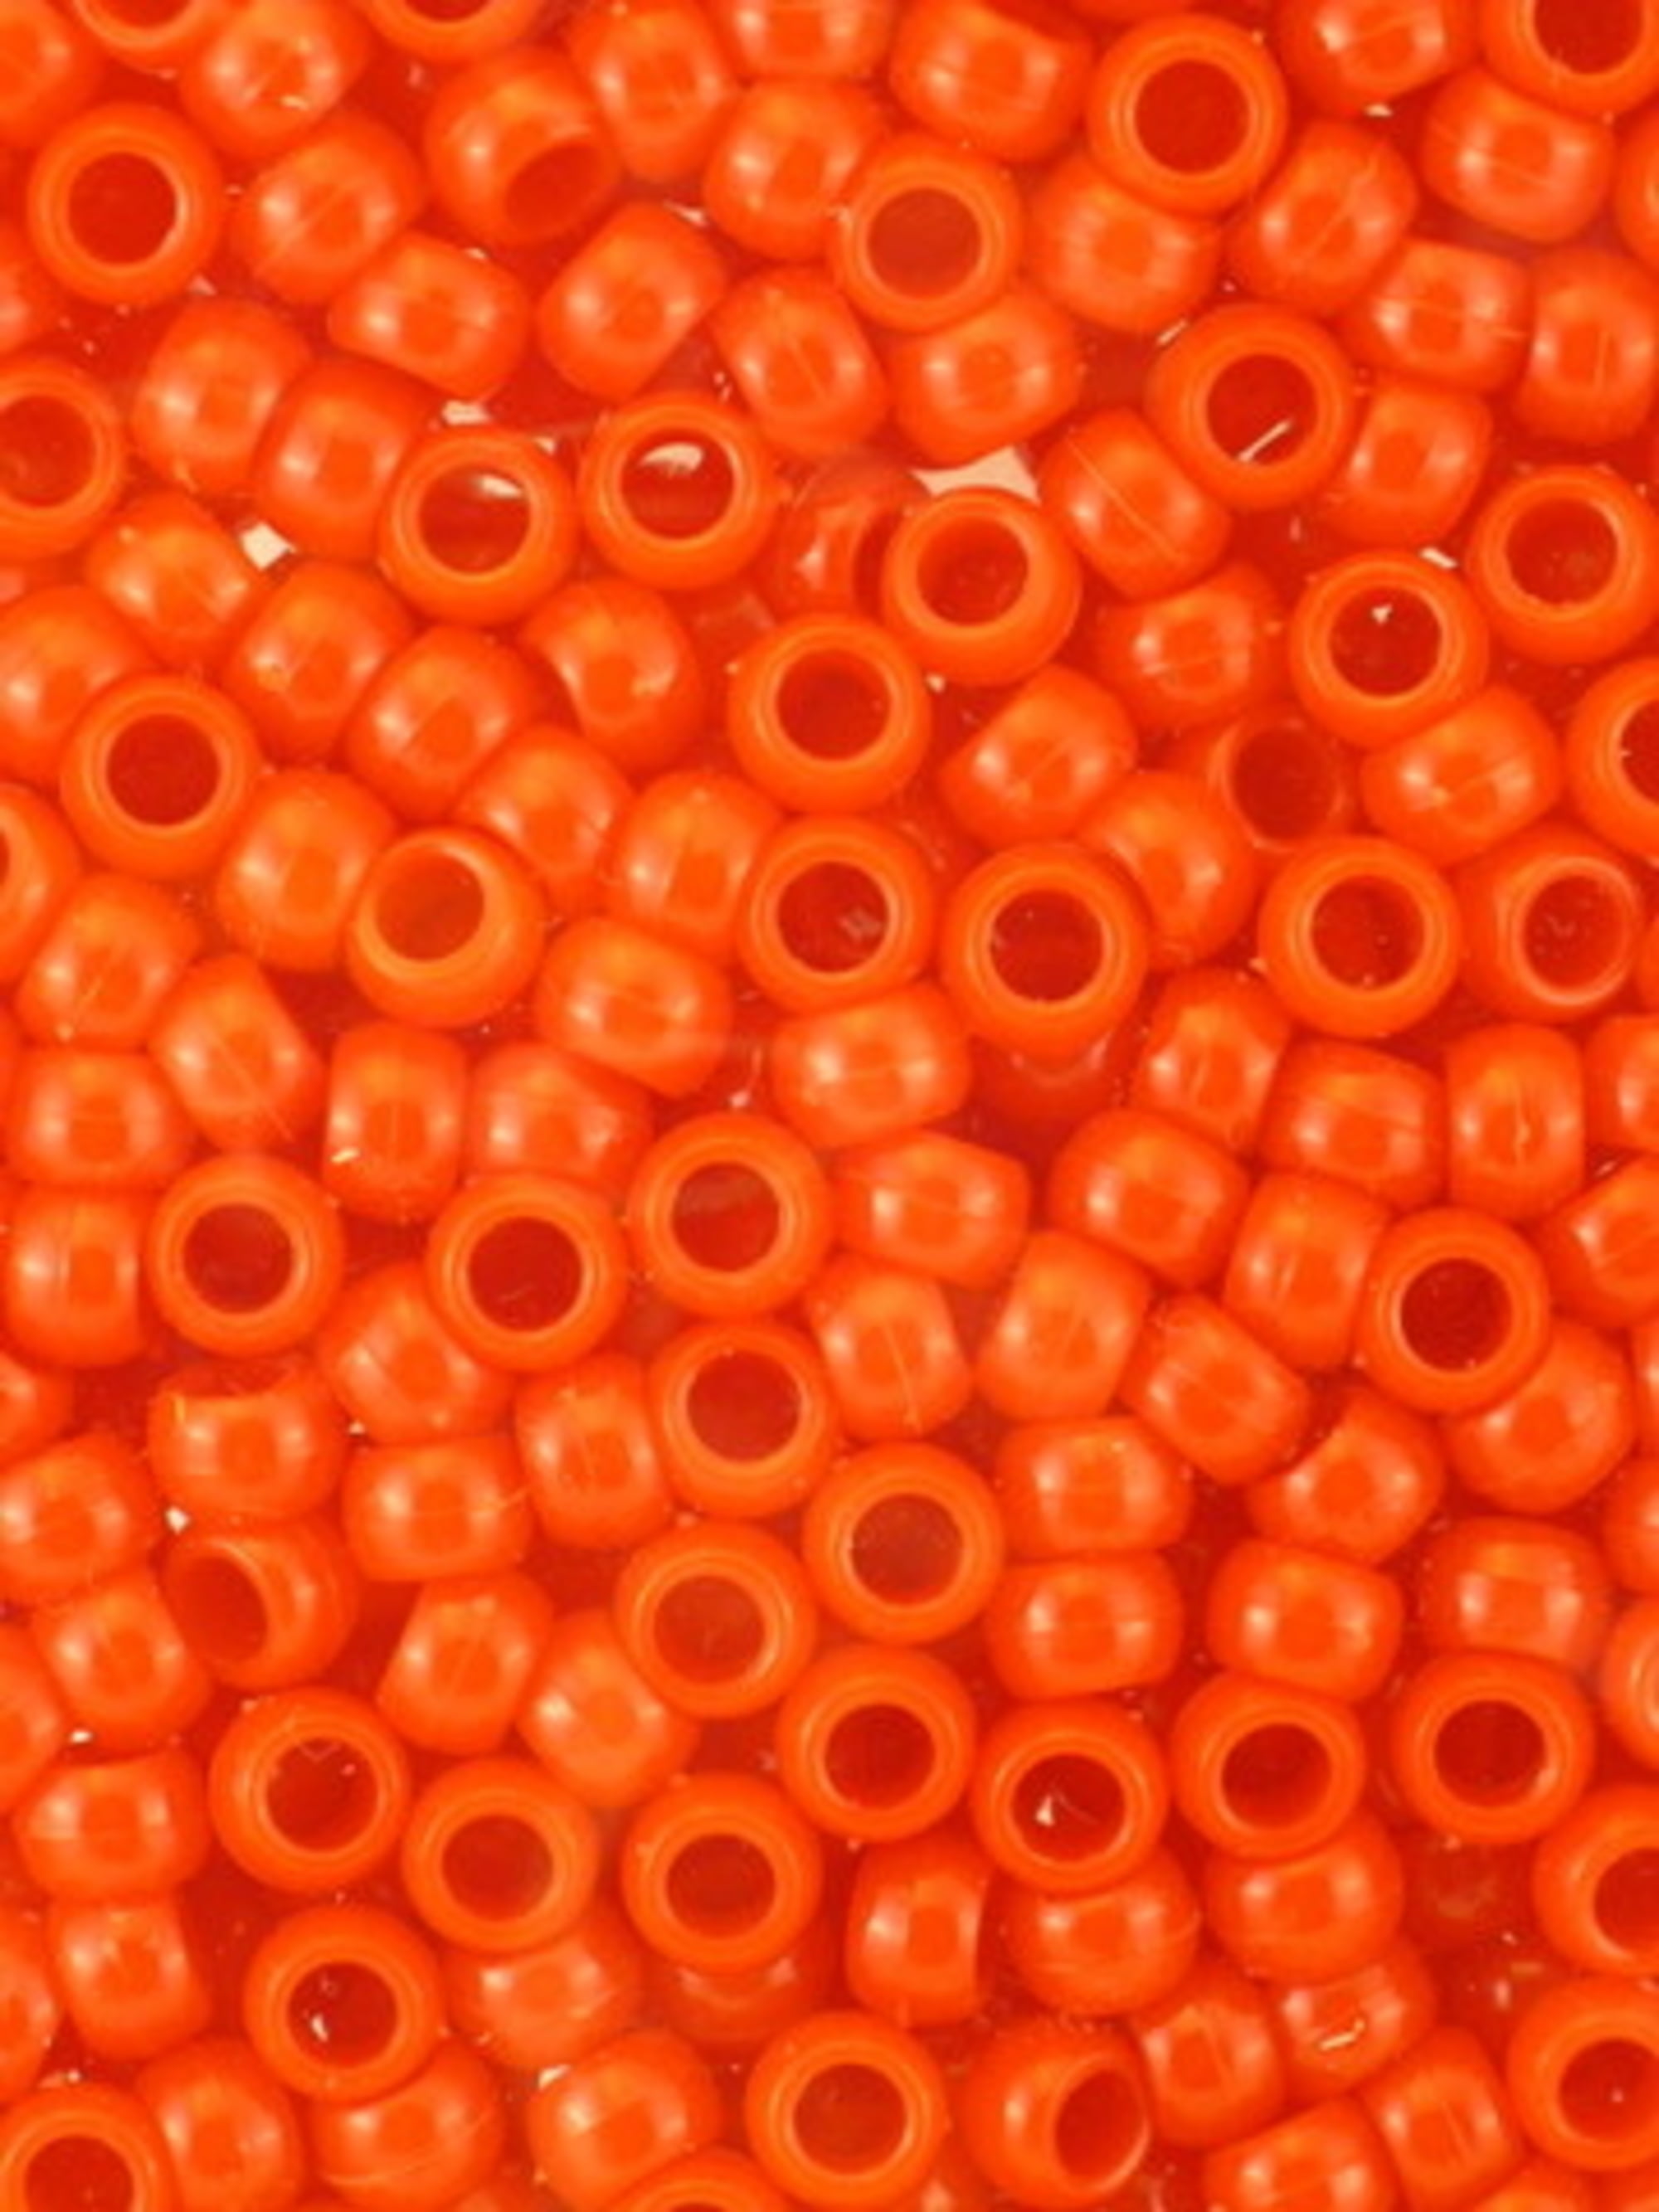 5Pc-Spiky Silicone Beads, Yellow/Orange/Orangy-Red, Spiky Fun Jewelry  Making, Supplies